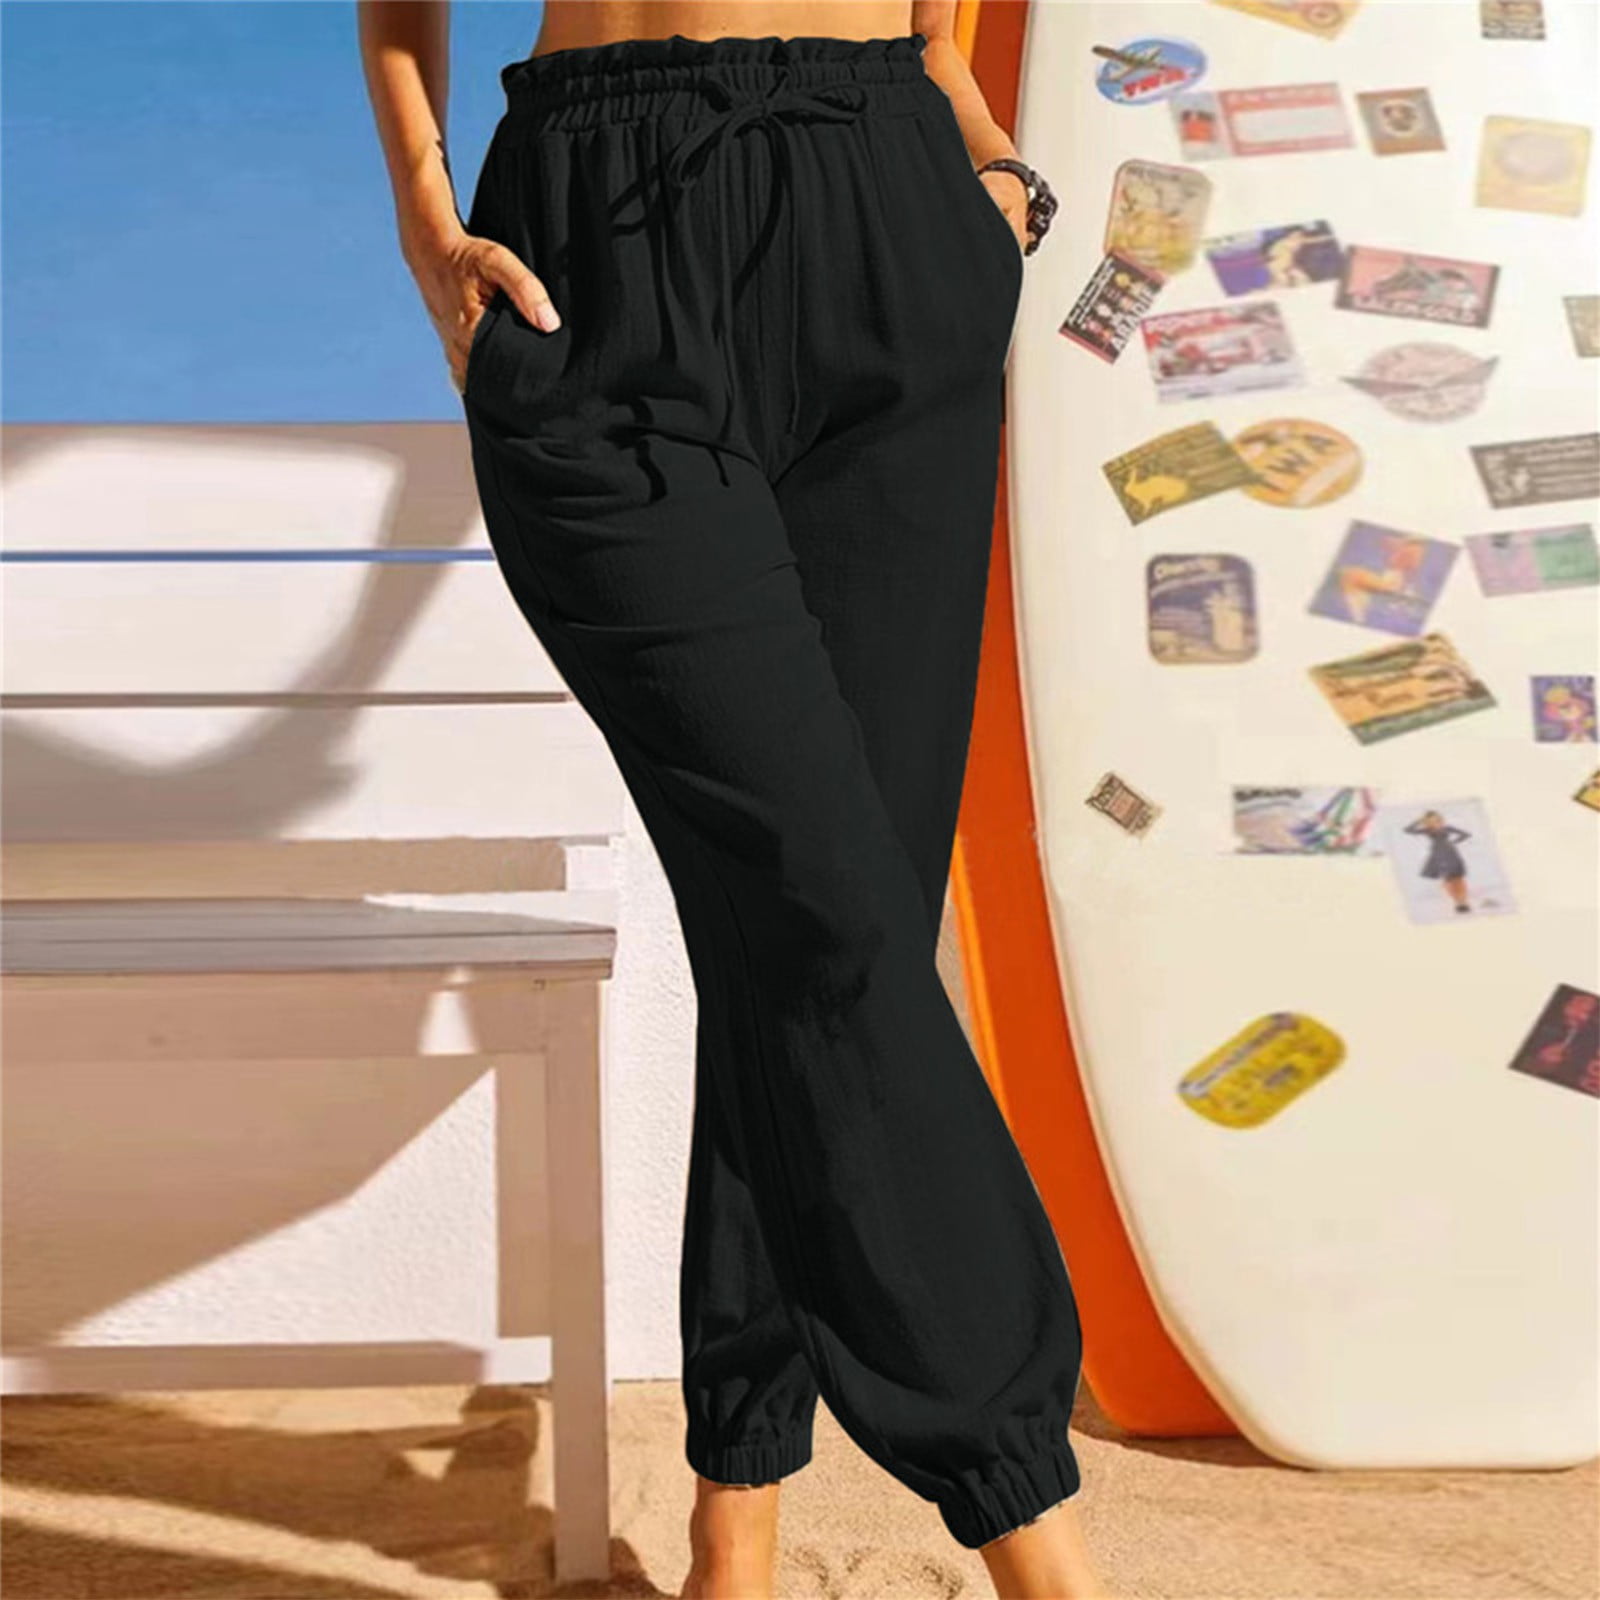 CRZ YOGA Womens 4-Way Stretch Ankle Golf Pants - 7/8 Dress Work Pants  Pockets Athletic Travel Casual Lounge Workout Black XX-Small at Amazon  Women's Clothing store